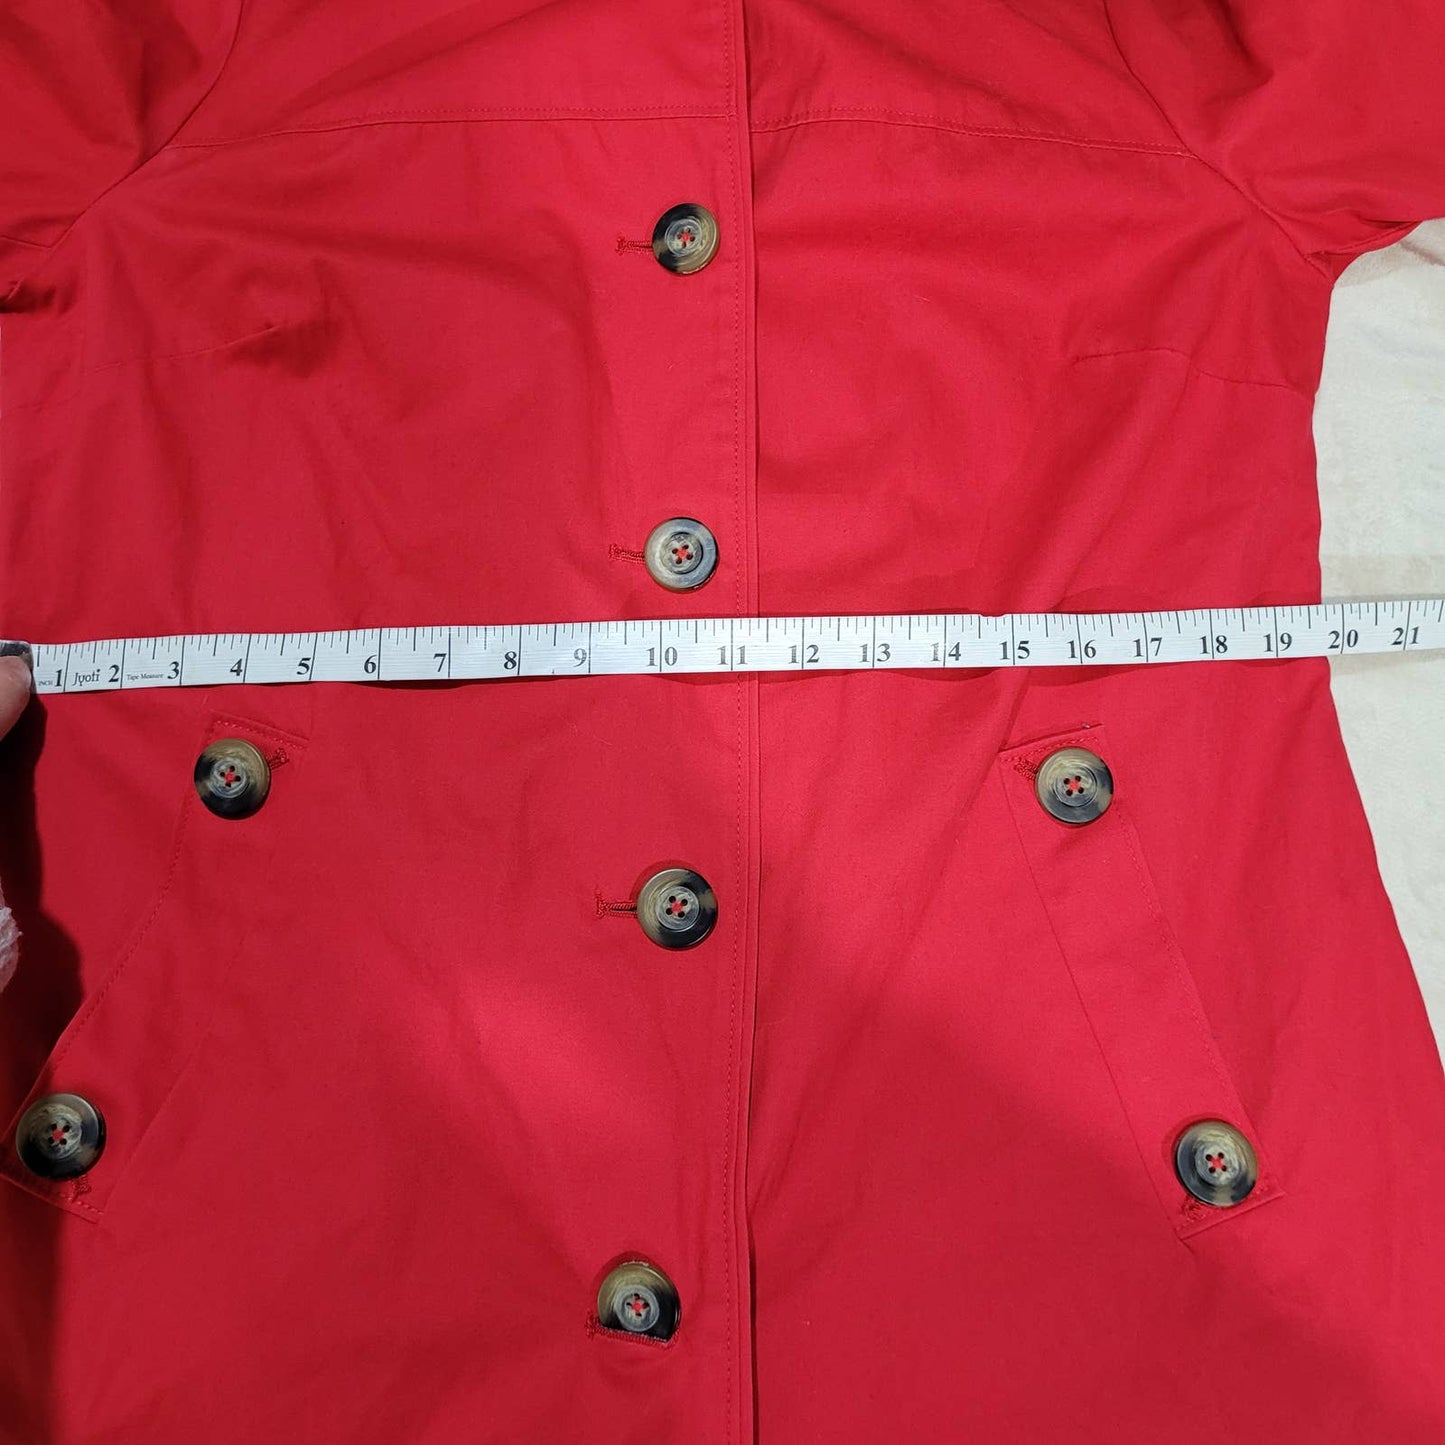 Boden Red Cotton Trench Coat - Size 10R